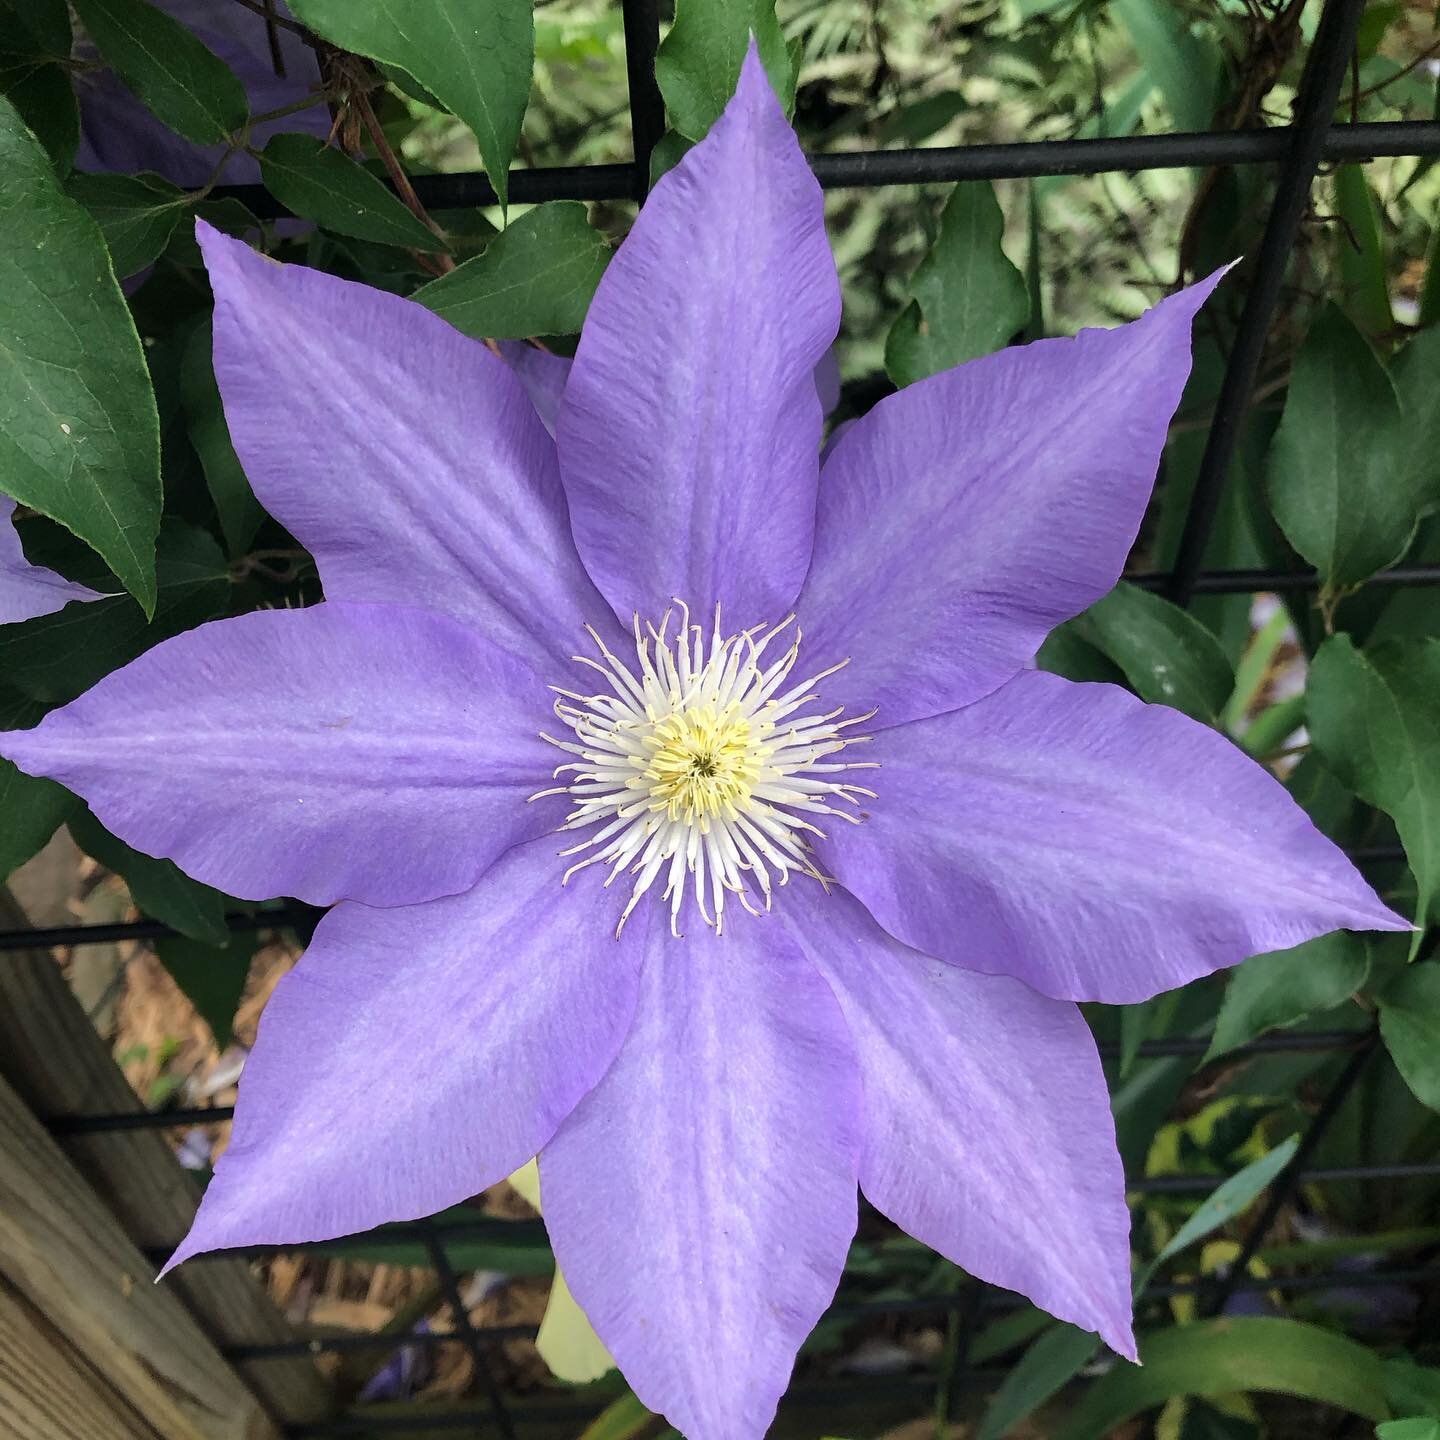 Spring in the mountains!

#ashevillenc #mountains #passionflower #828isgreat